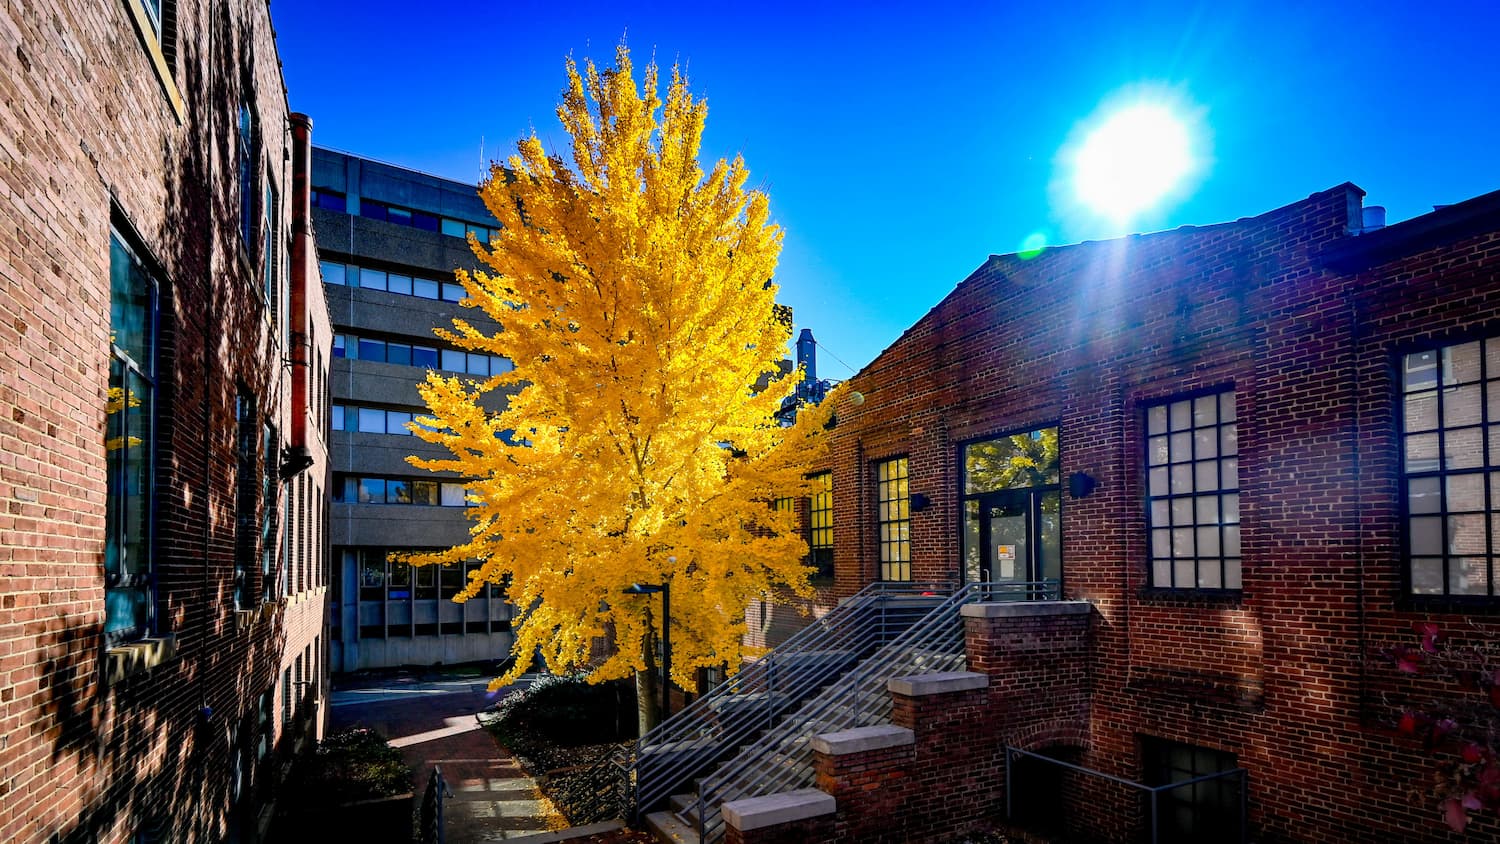 A golden yellow ginkgo tree outside of Park Shops in fall 2022.